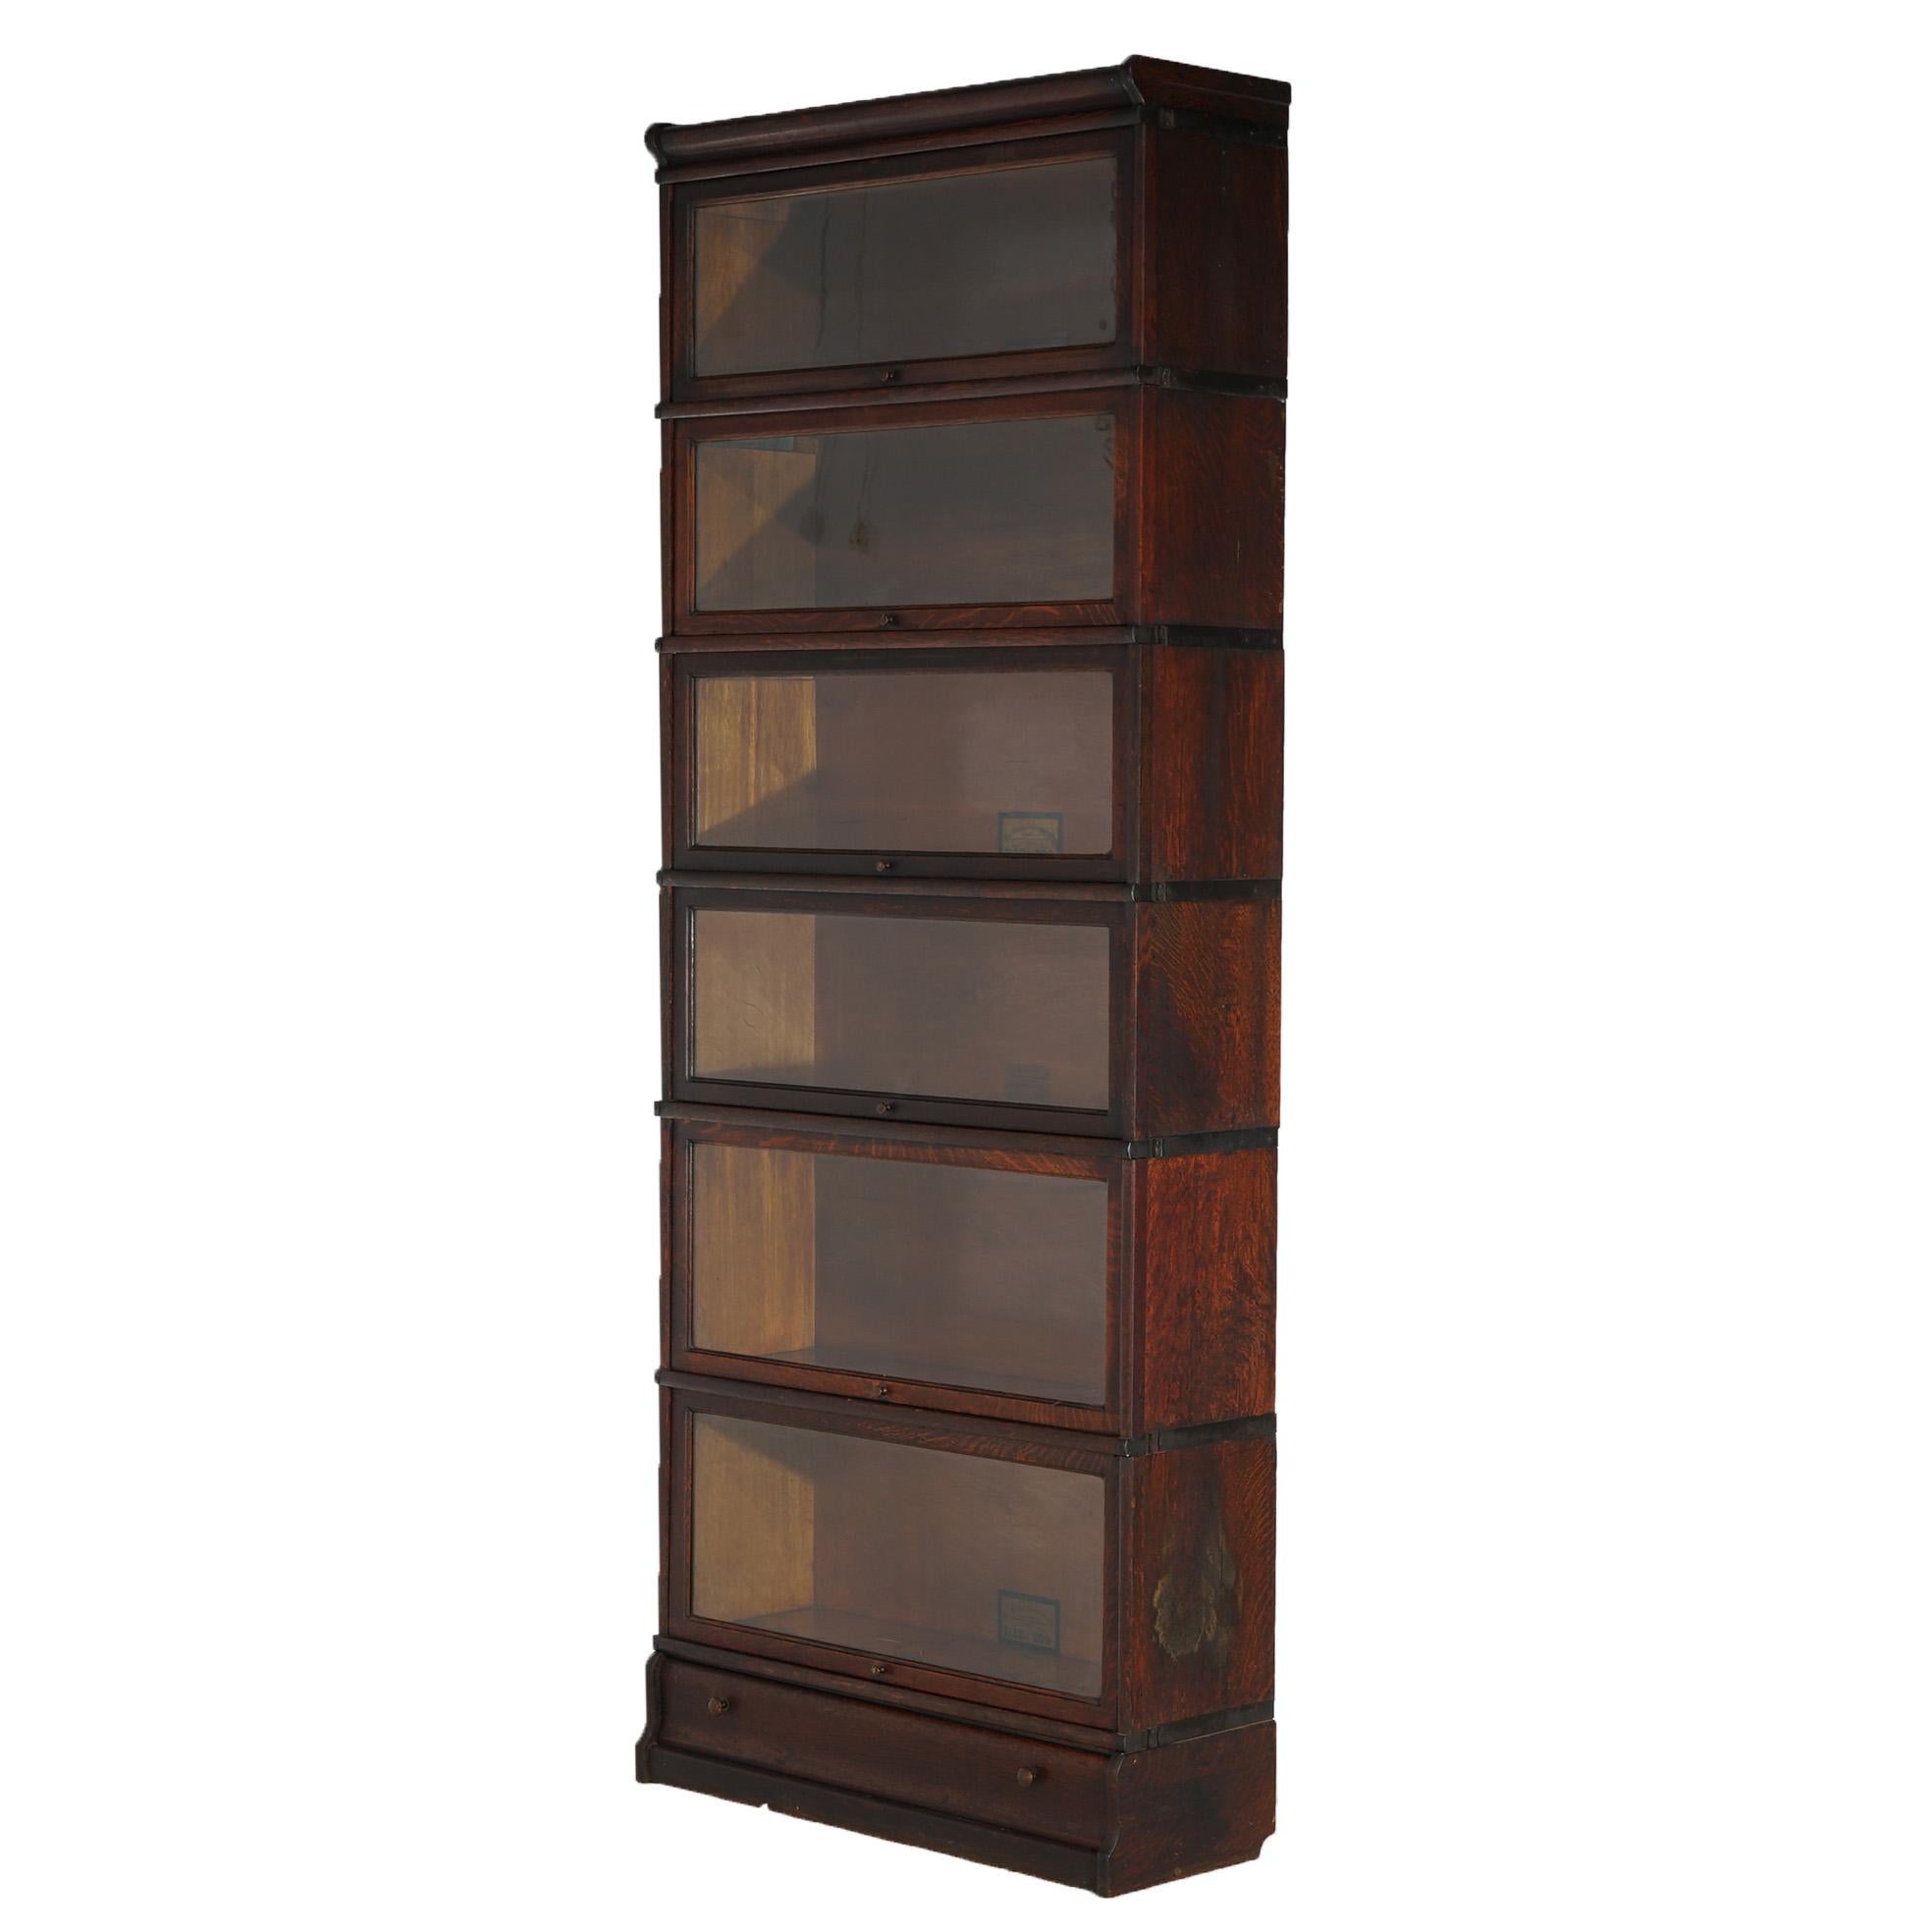 An antique Arts and Crafts Mission barrister bookcase by Globe Wernicke offers oak construction with six stacks, each having pull-out glass doors and raised on an ogee base having a single long drawer; maker labels as photographed; c1910

Measures -